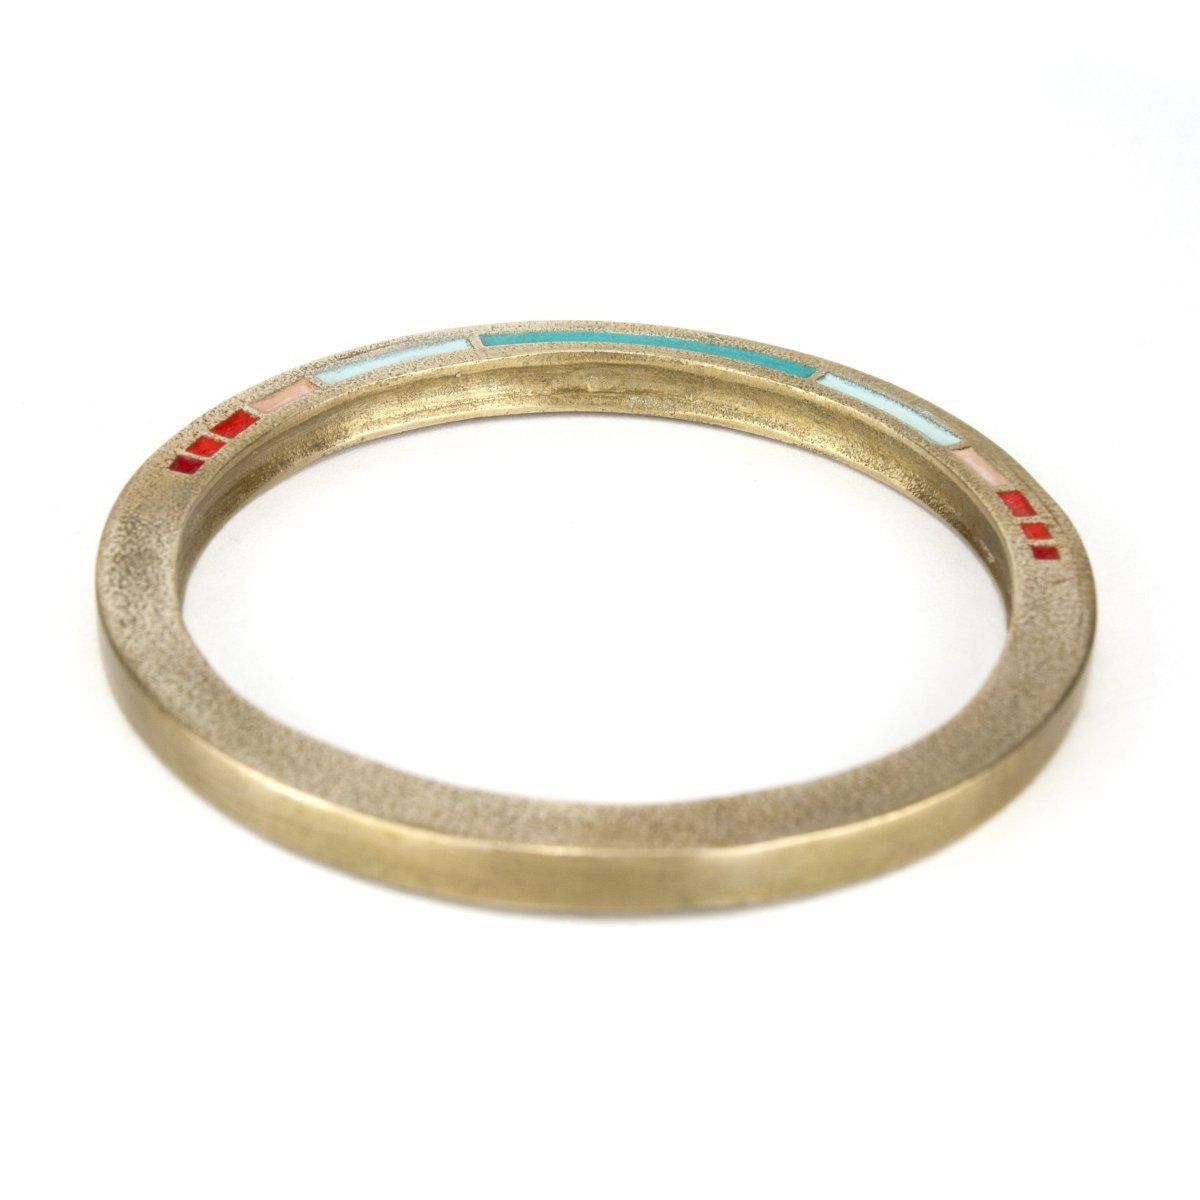 Cast bronze bangle with Mexico colors.